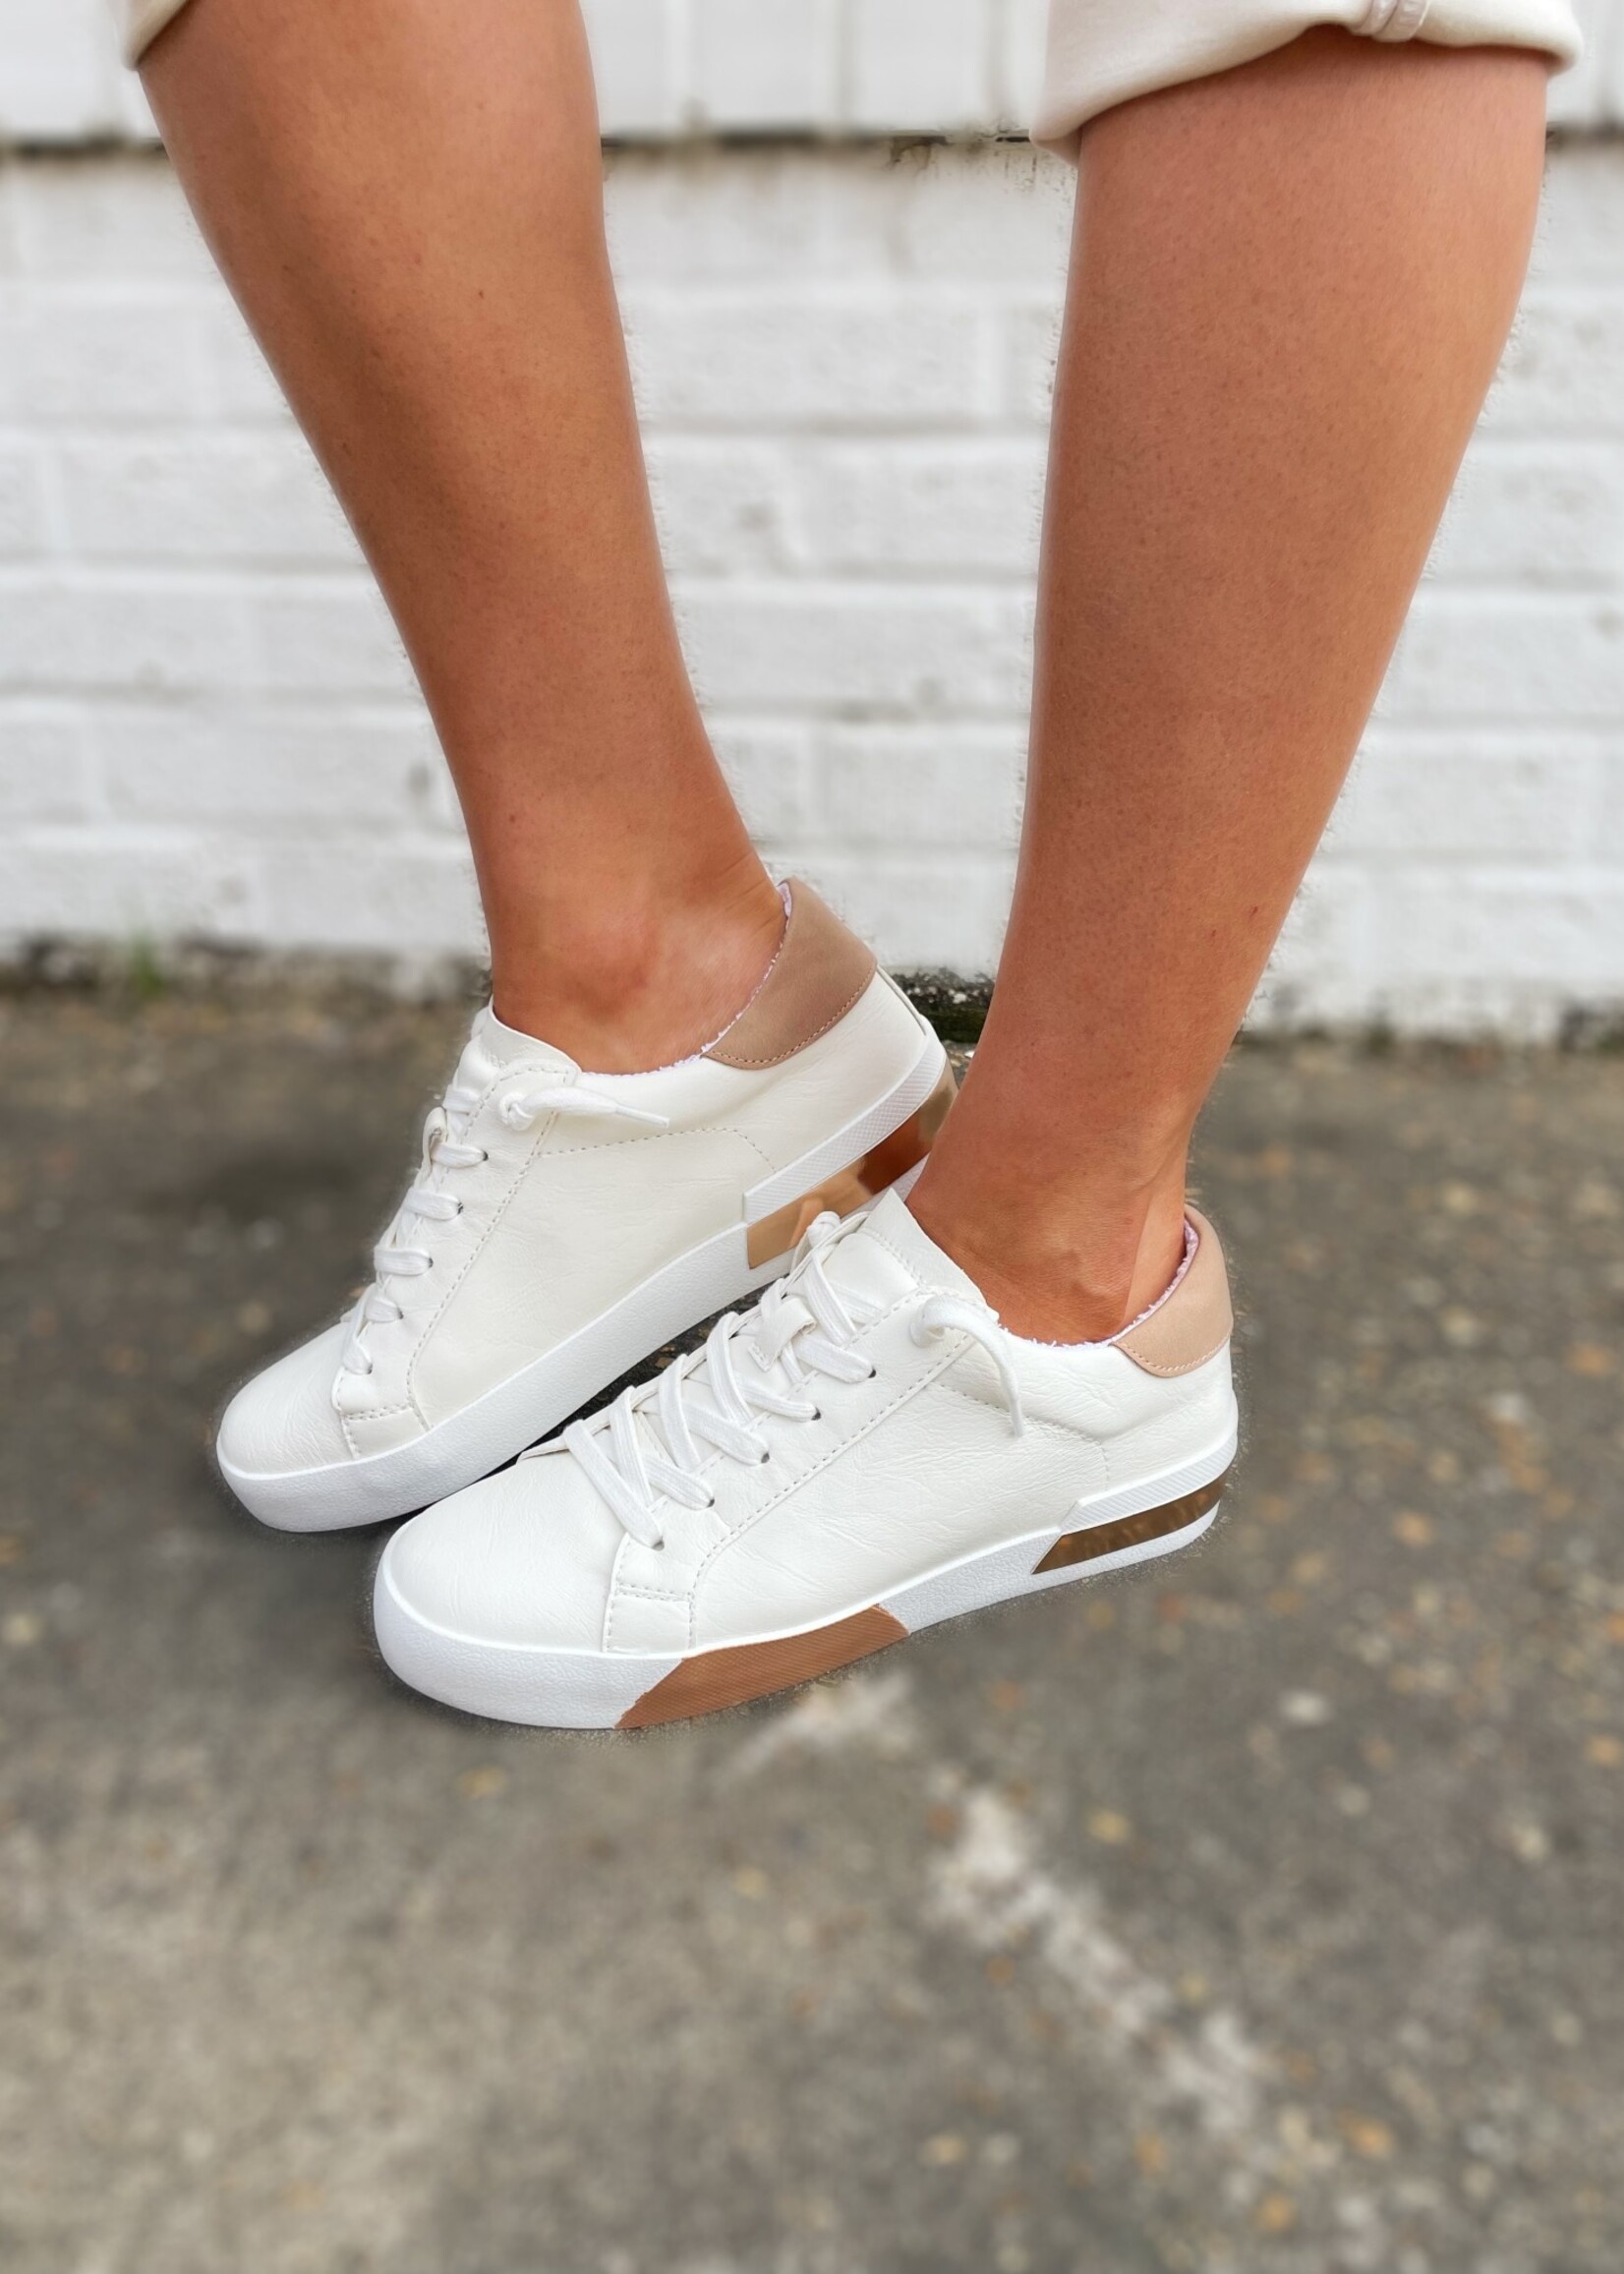 Bloom and Company Zion Nude and Rose Gold Sneaker